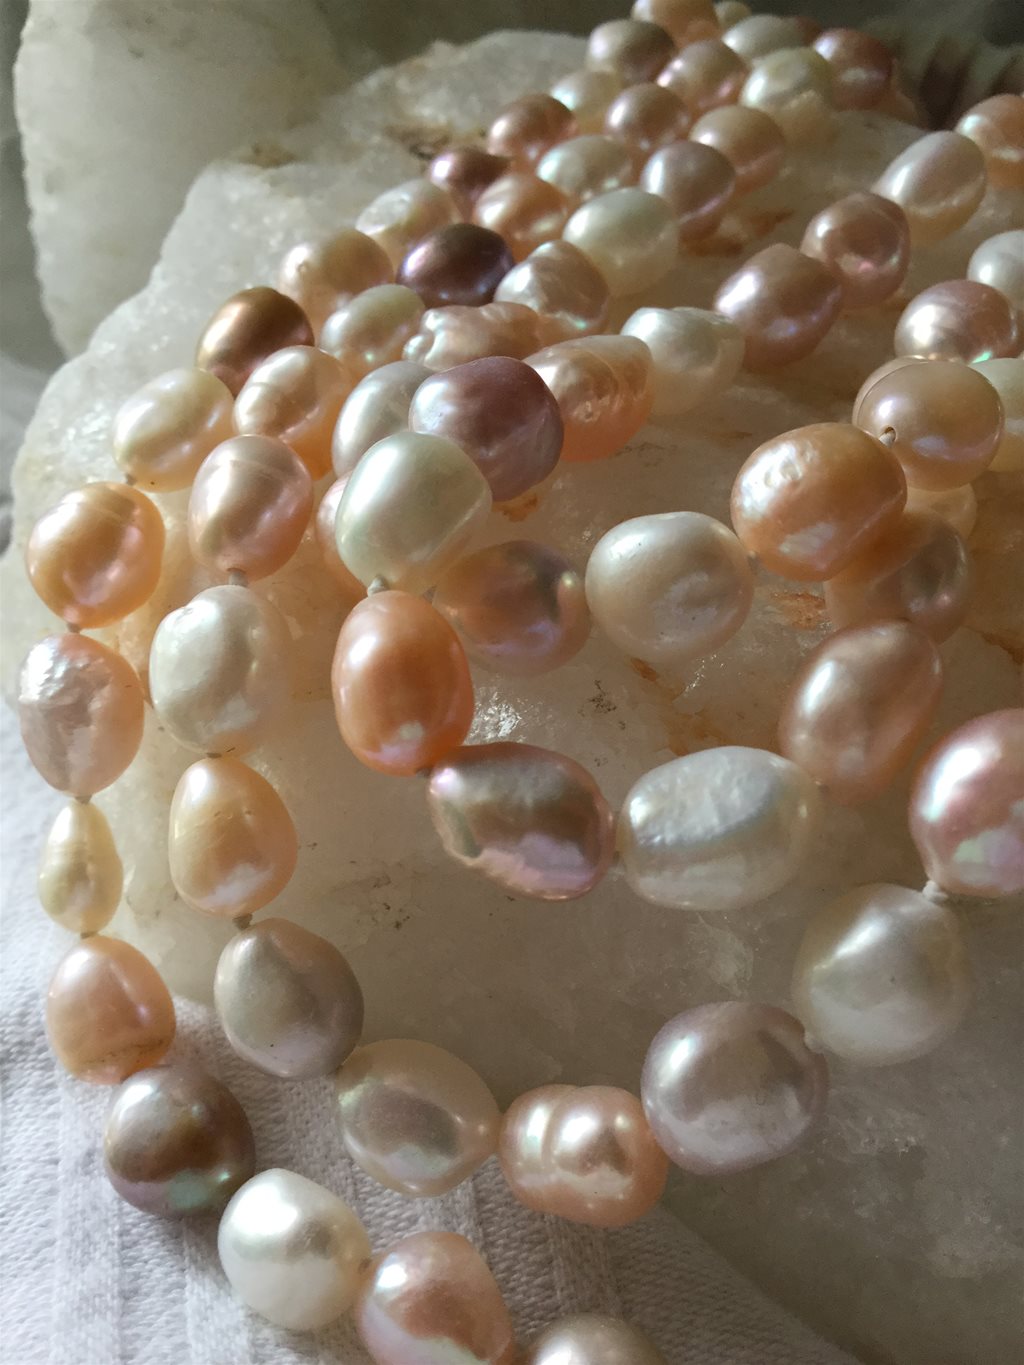 Baroque Pearls multi colour freshwater cultured nugget pearls 8/5 x 11 mm 164 cm strand - Image 3 of 4